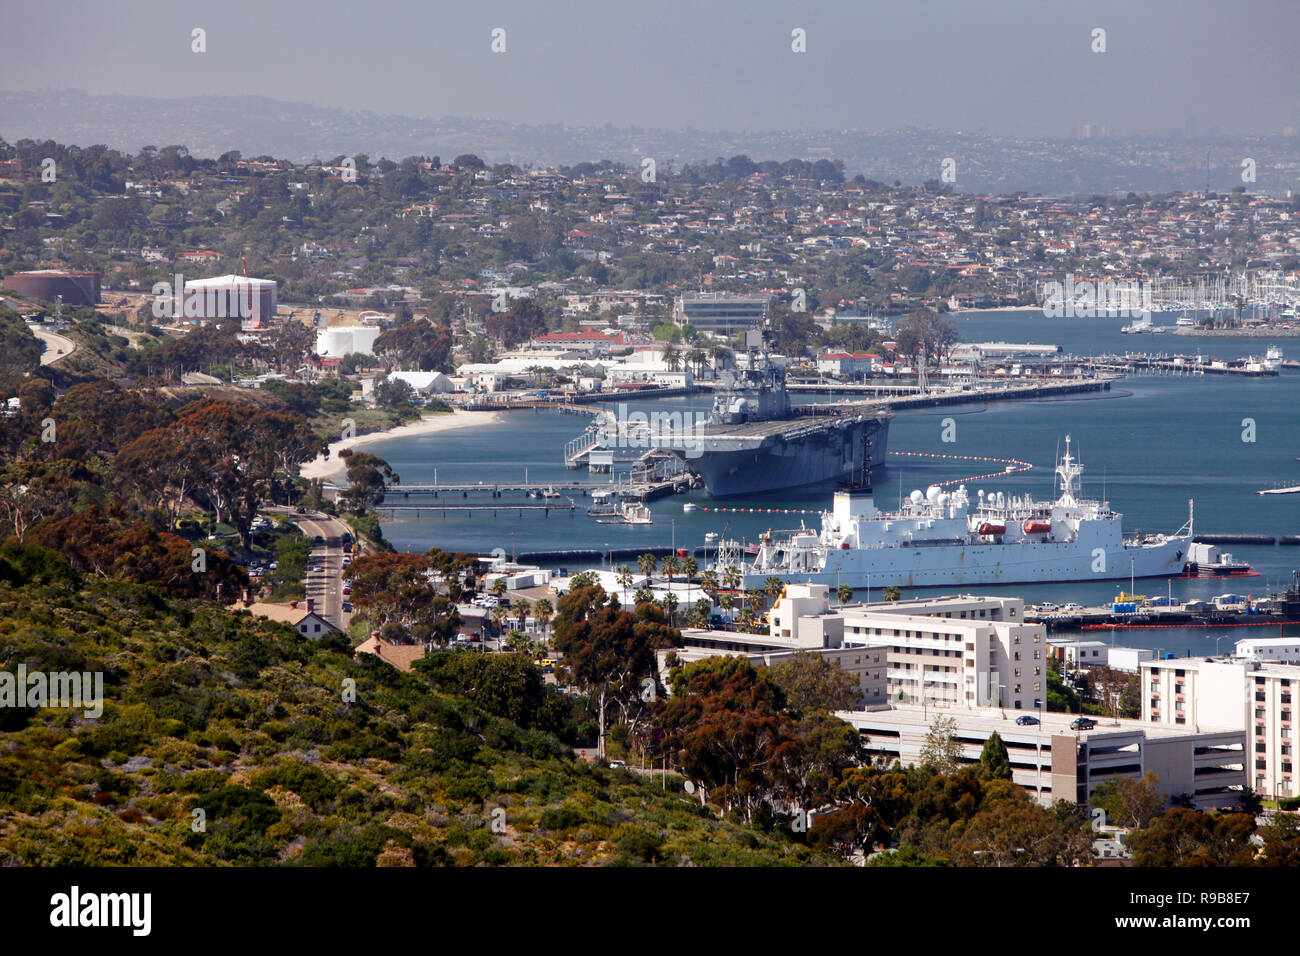 USA, California, San Diego, a view of the San Diego Bay and USS Midway Museum from the Cabrillo National Monument Stock Photo